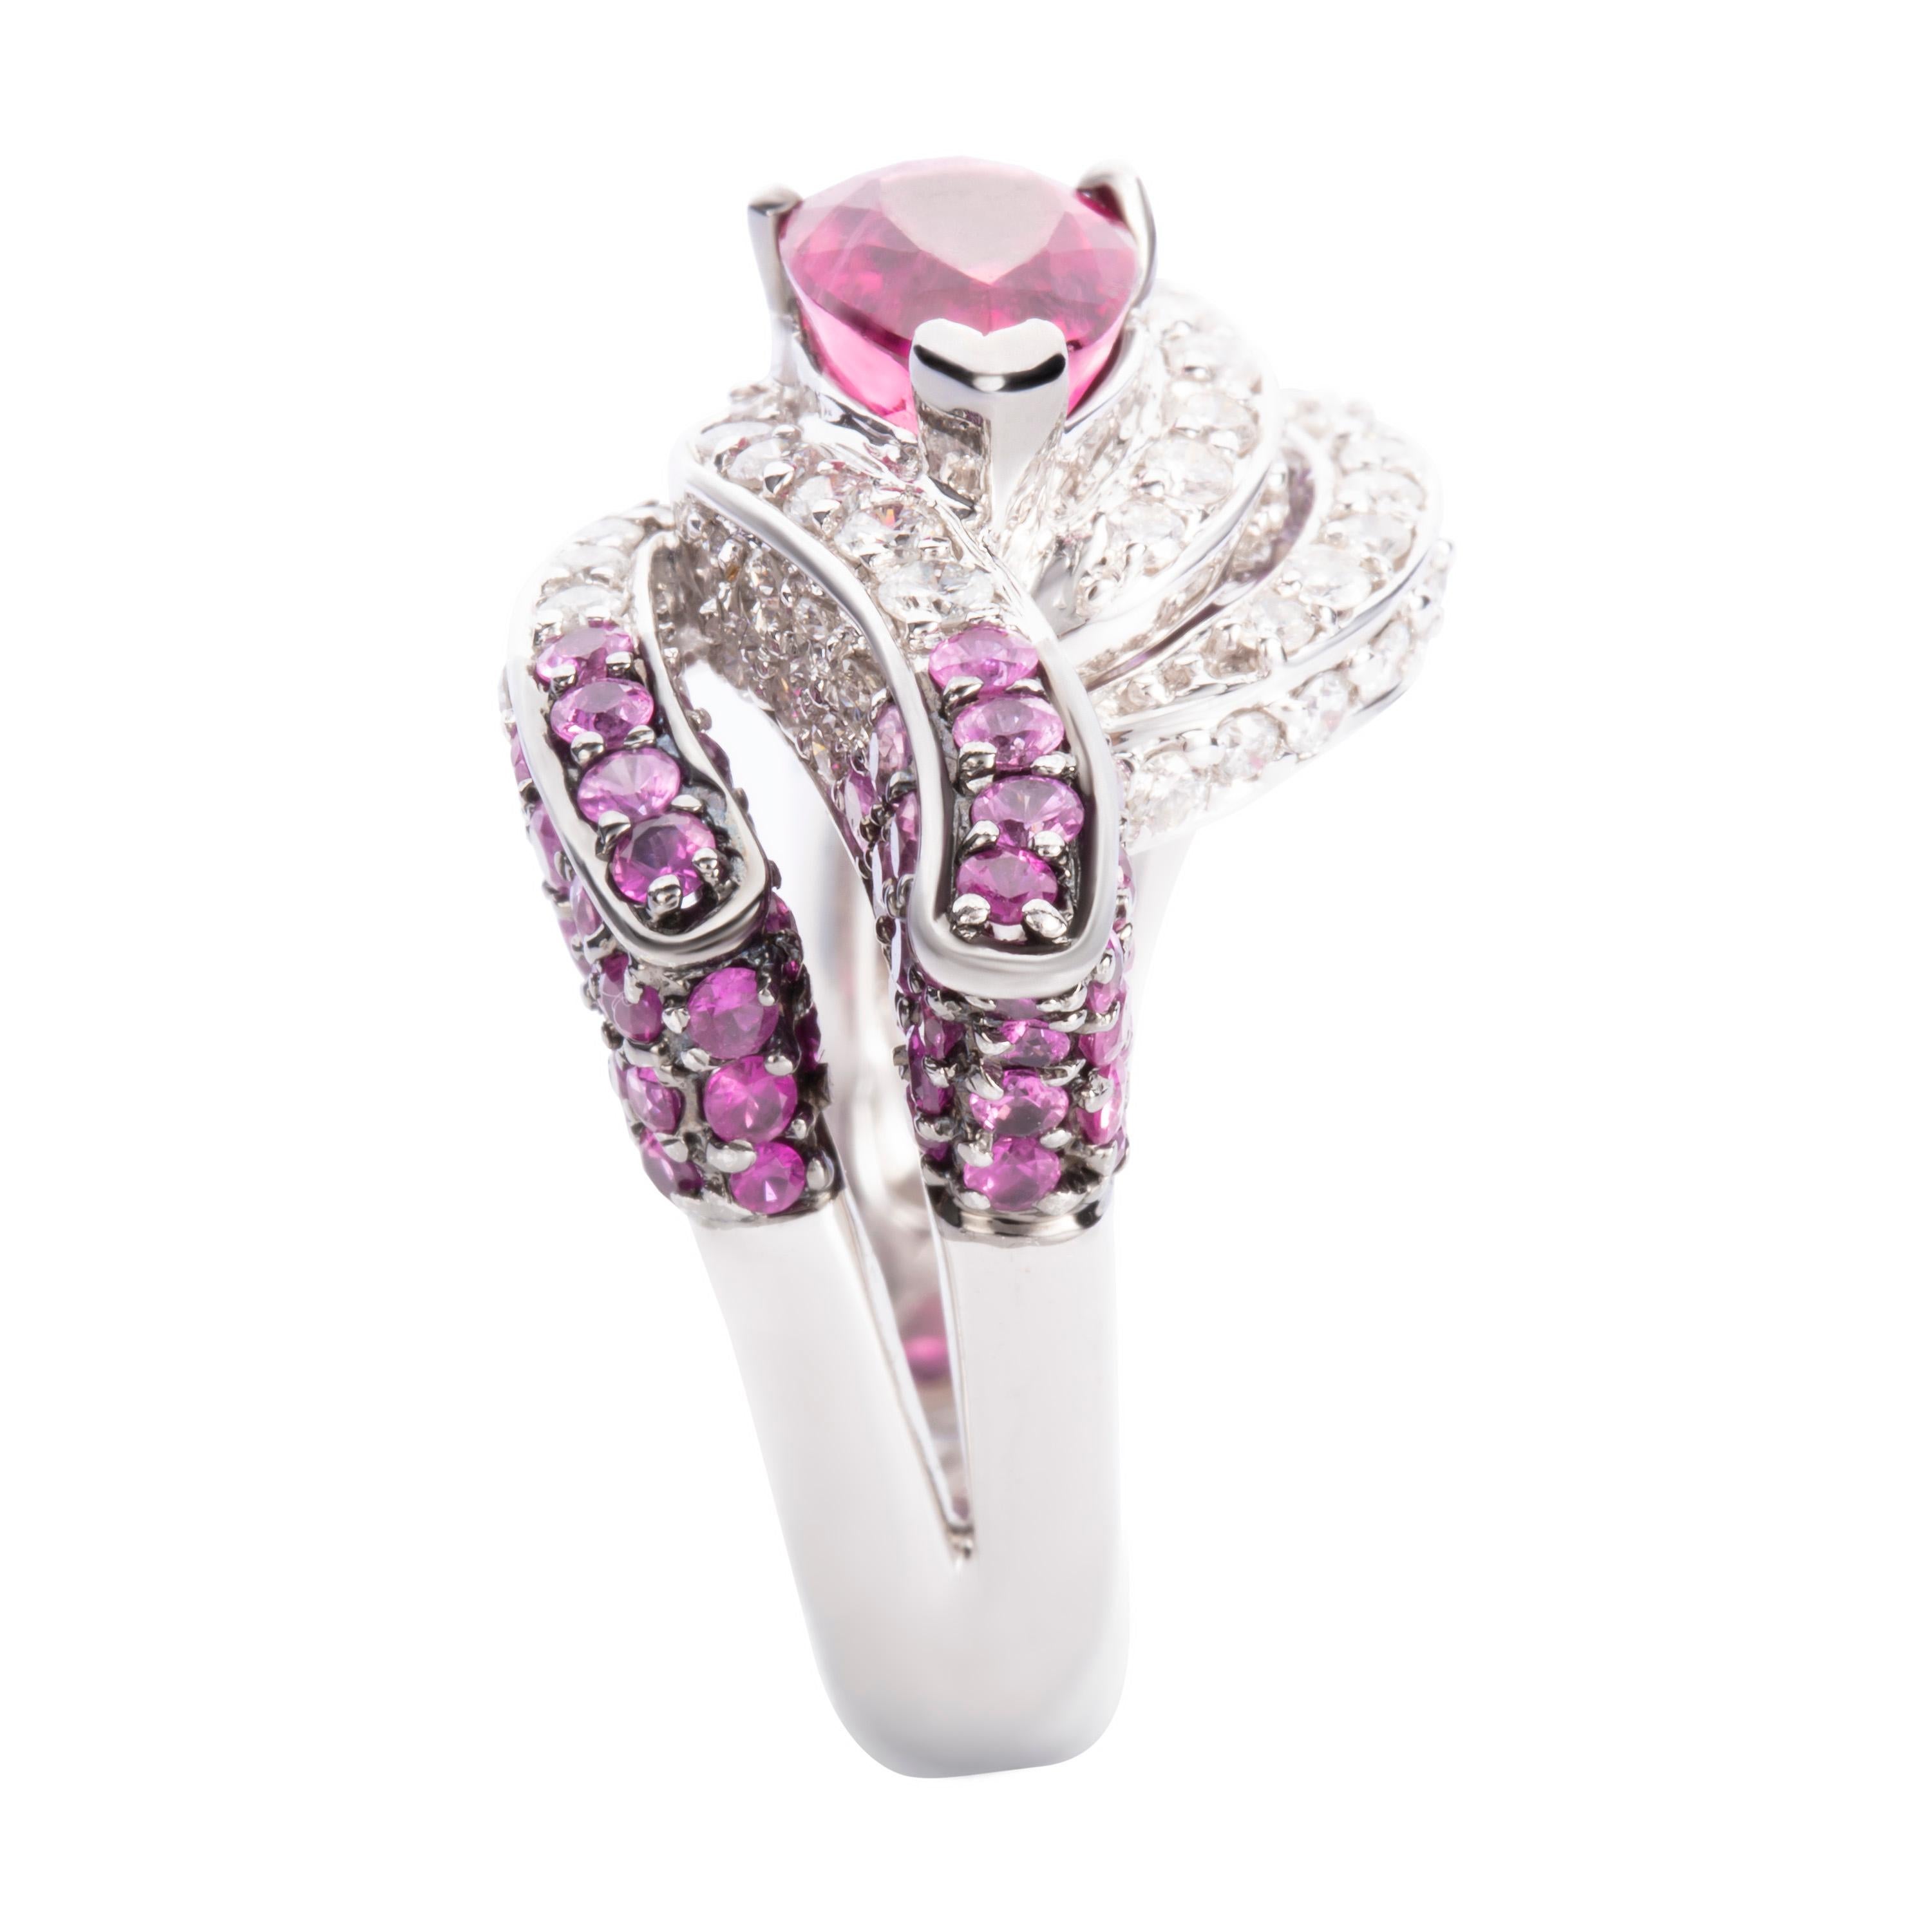 Contemporary 1.57 Carat Pear Rubelite Pink Sapphire Diamond 18 Karat White Gold Cocktail Ring For Sale